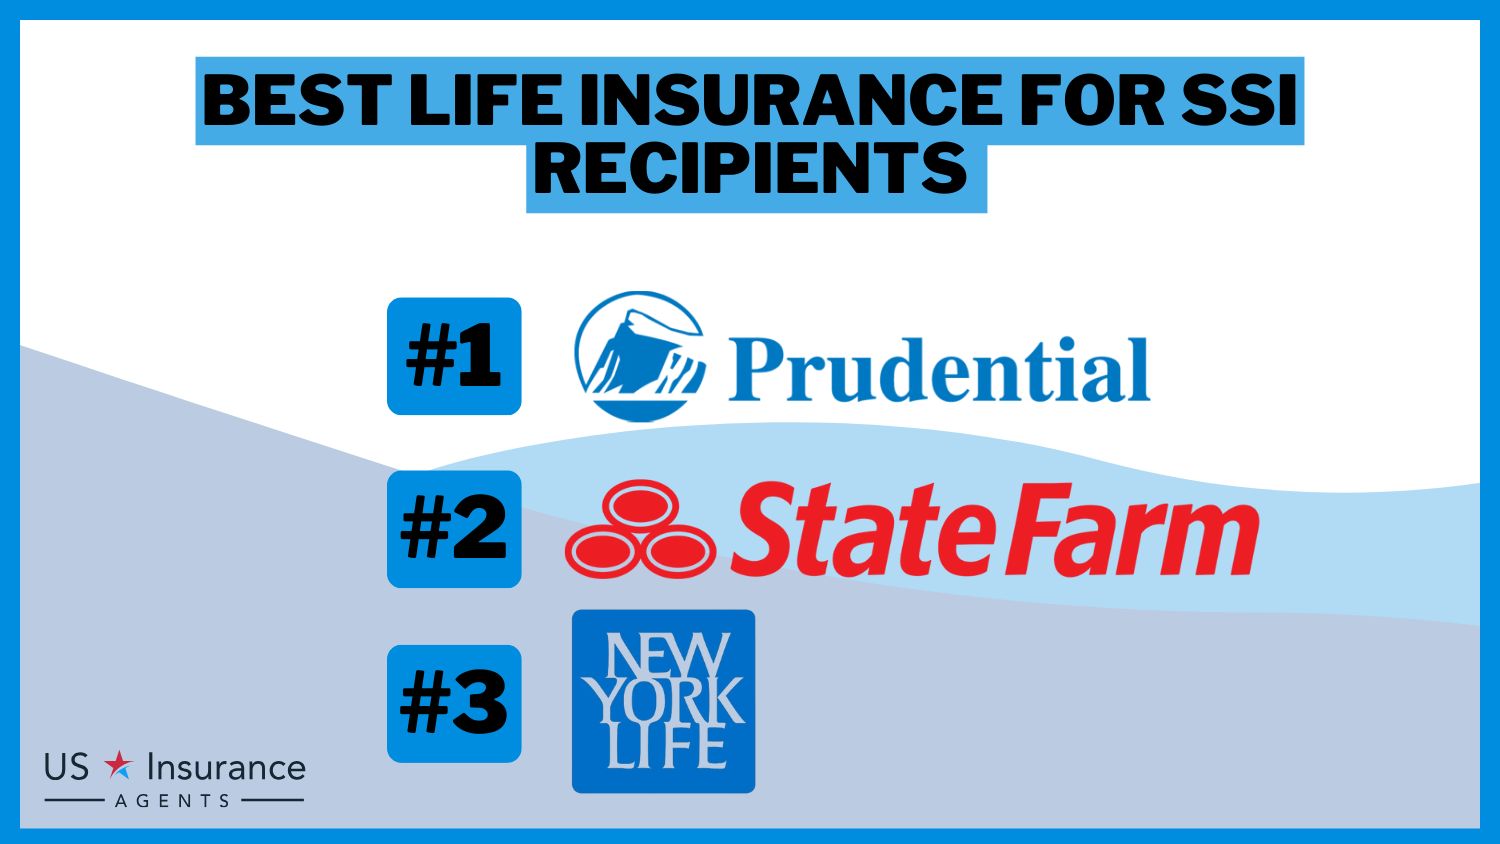 Best Life Insurance for SSI Recipients